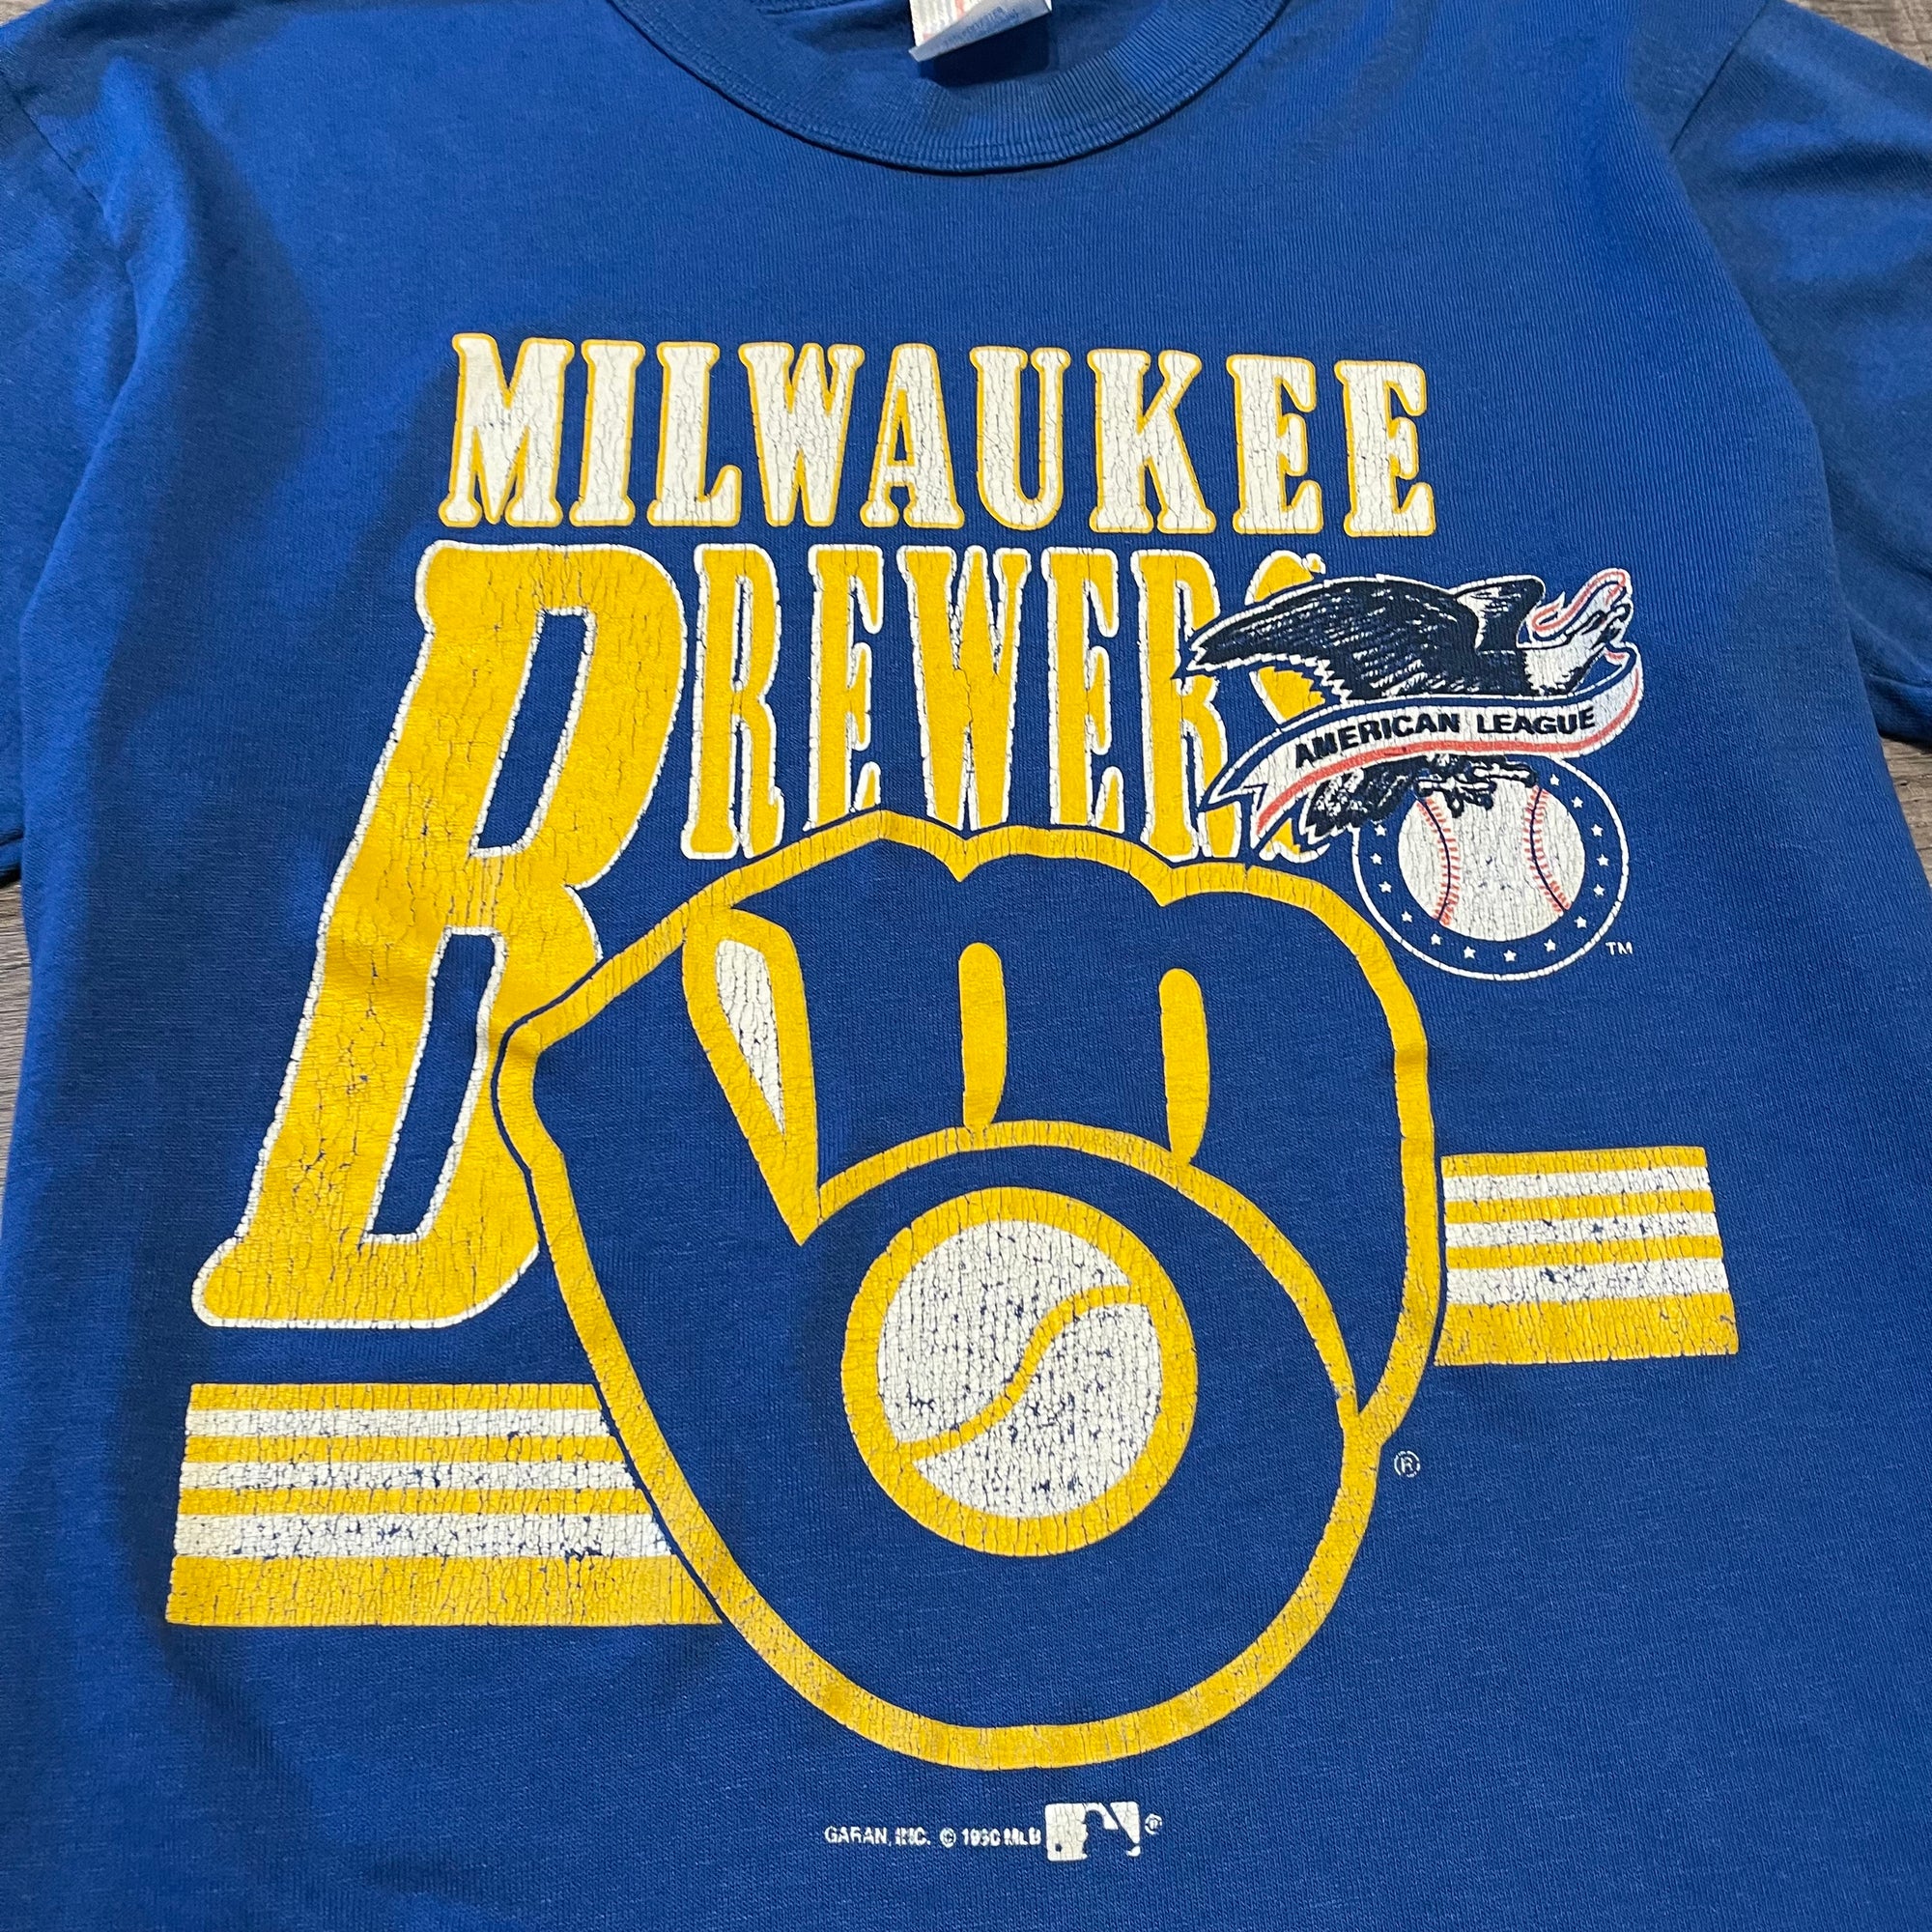 Milwaukee Brewers - So, like, the '90s Night t-shirts came in today and we  think they're pretty fresh. Brewers.com/themenights